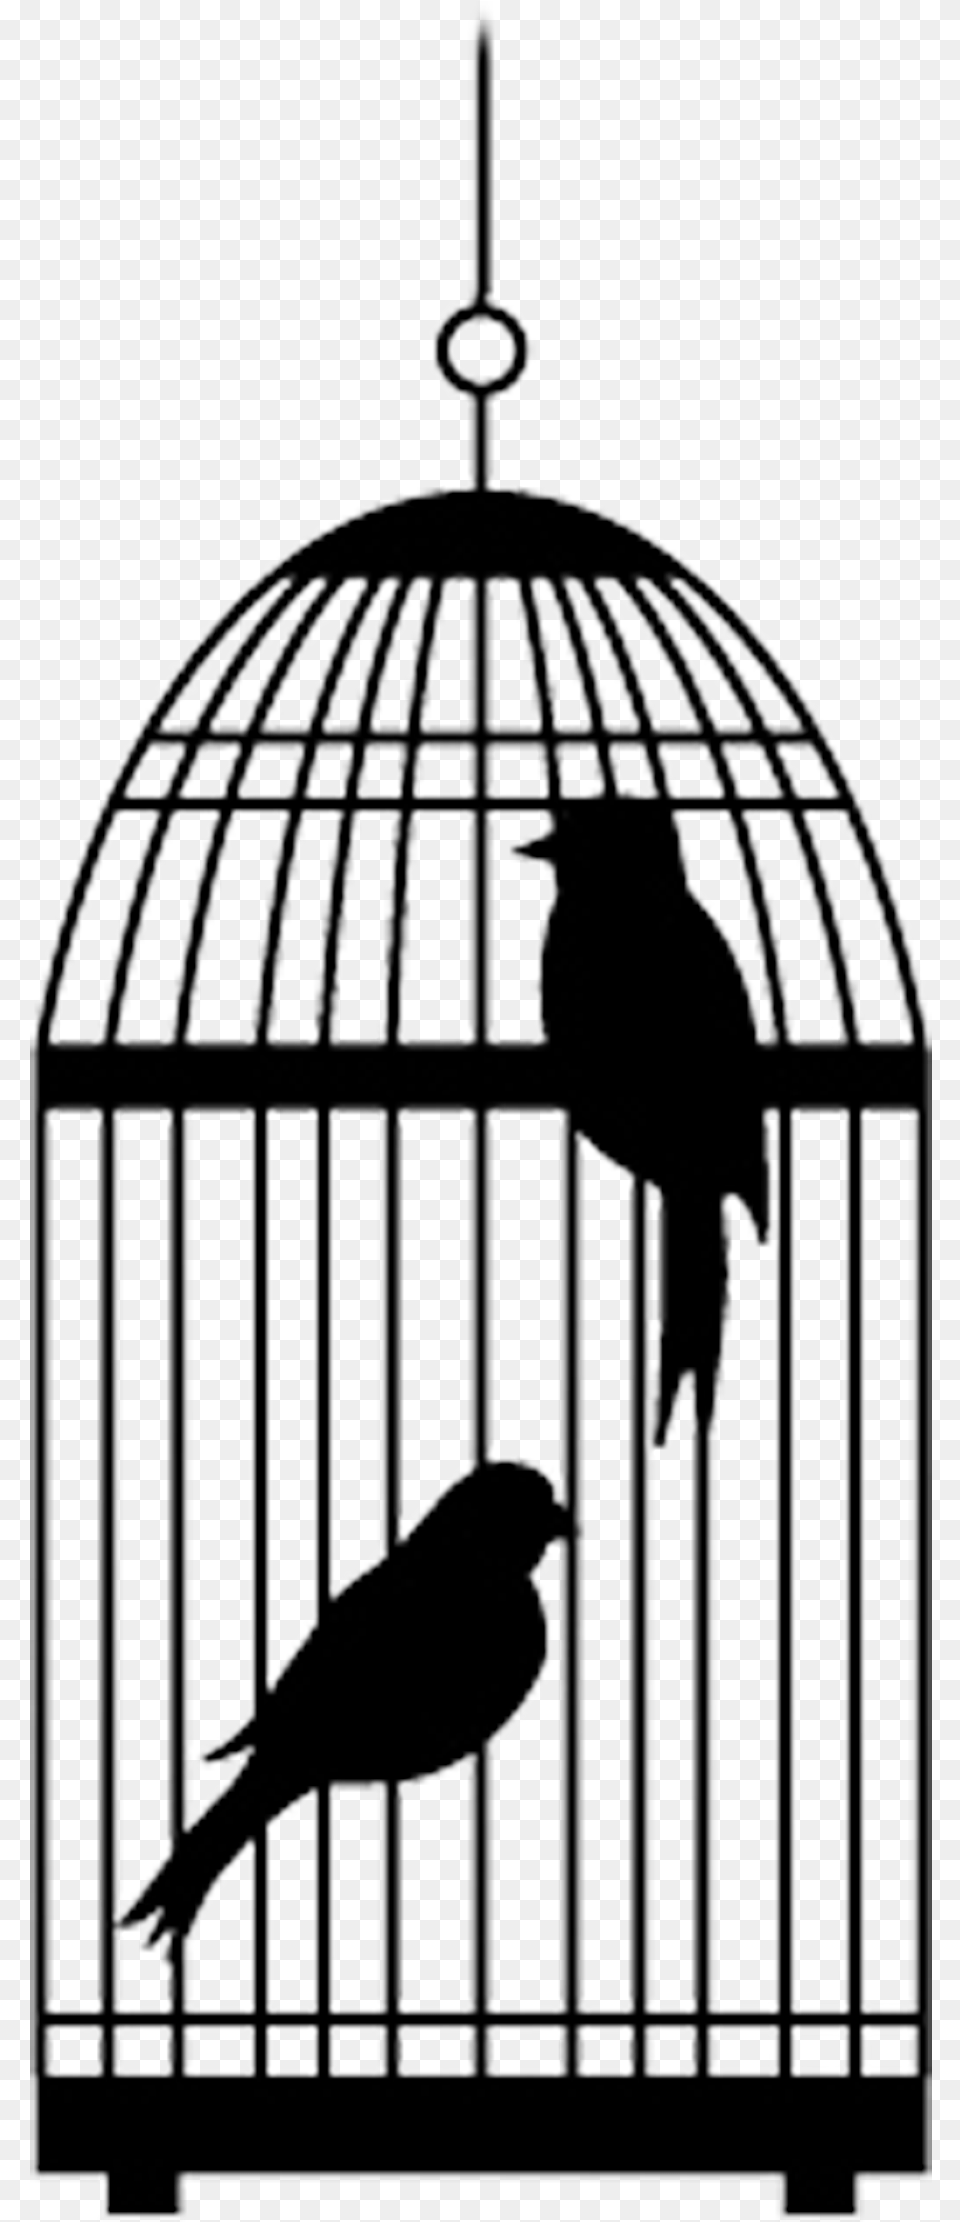 Bird Cage With Two Birds Transparent Cartoons Cage Clipart Bird In A Cage Transparent Background, Animal Png